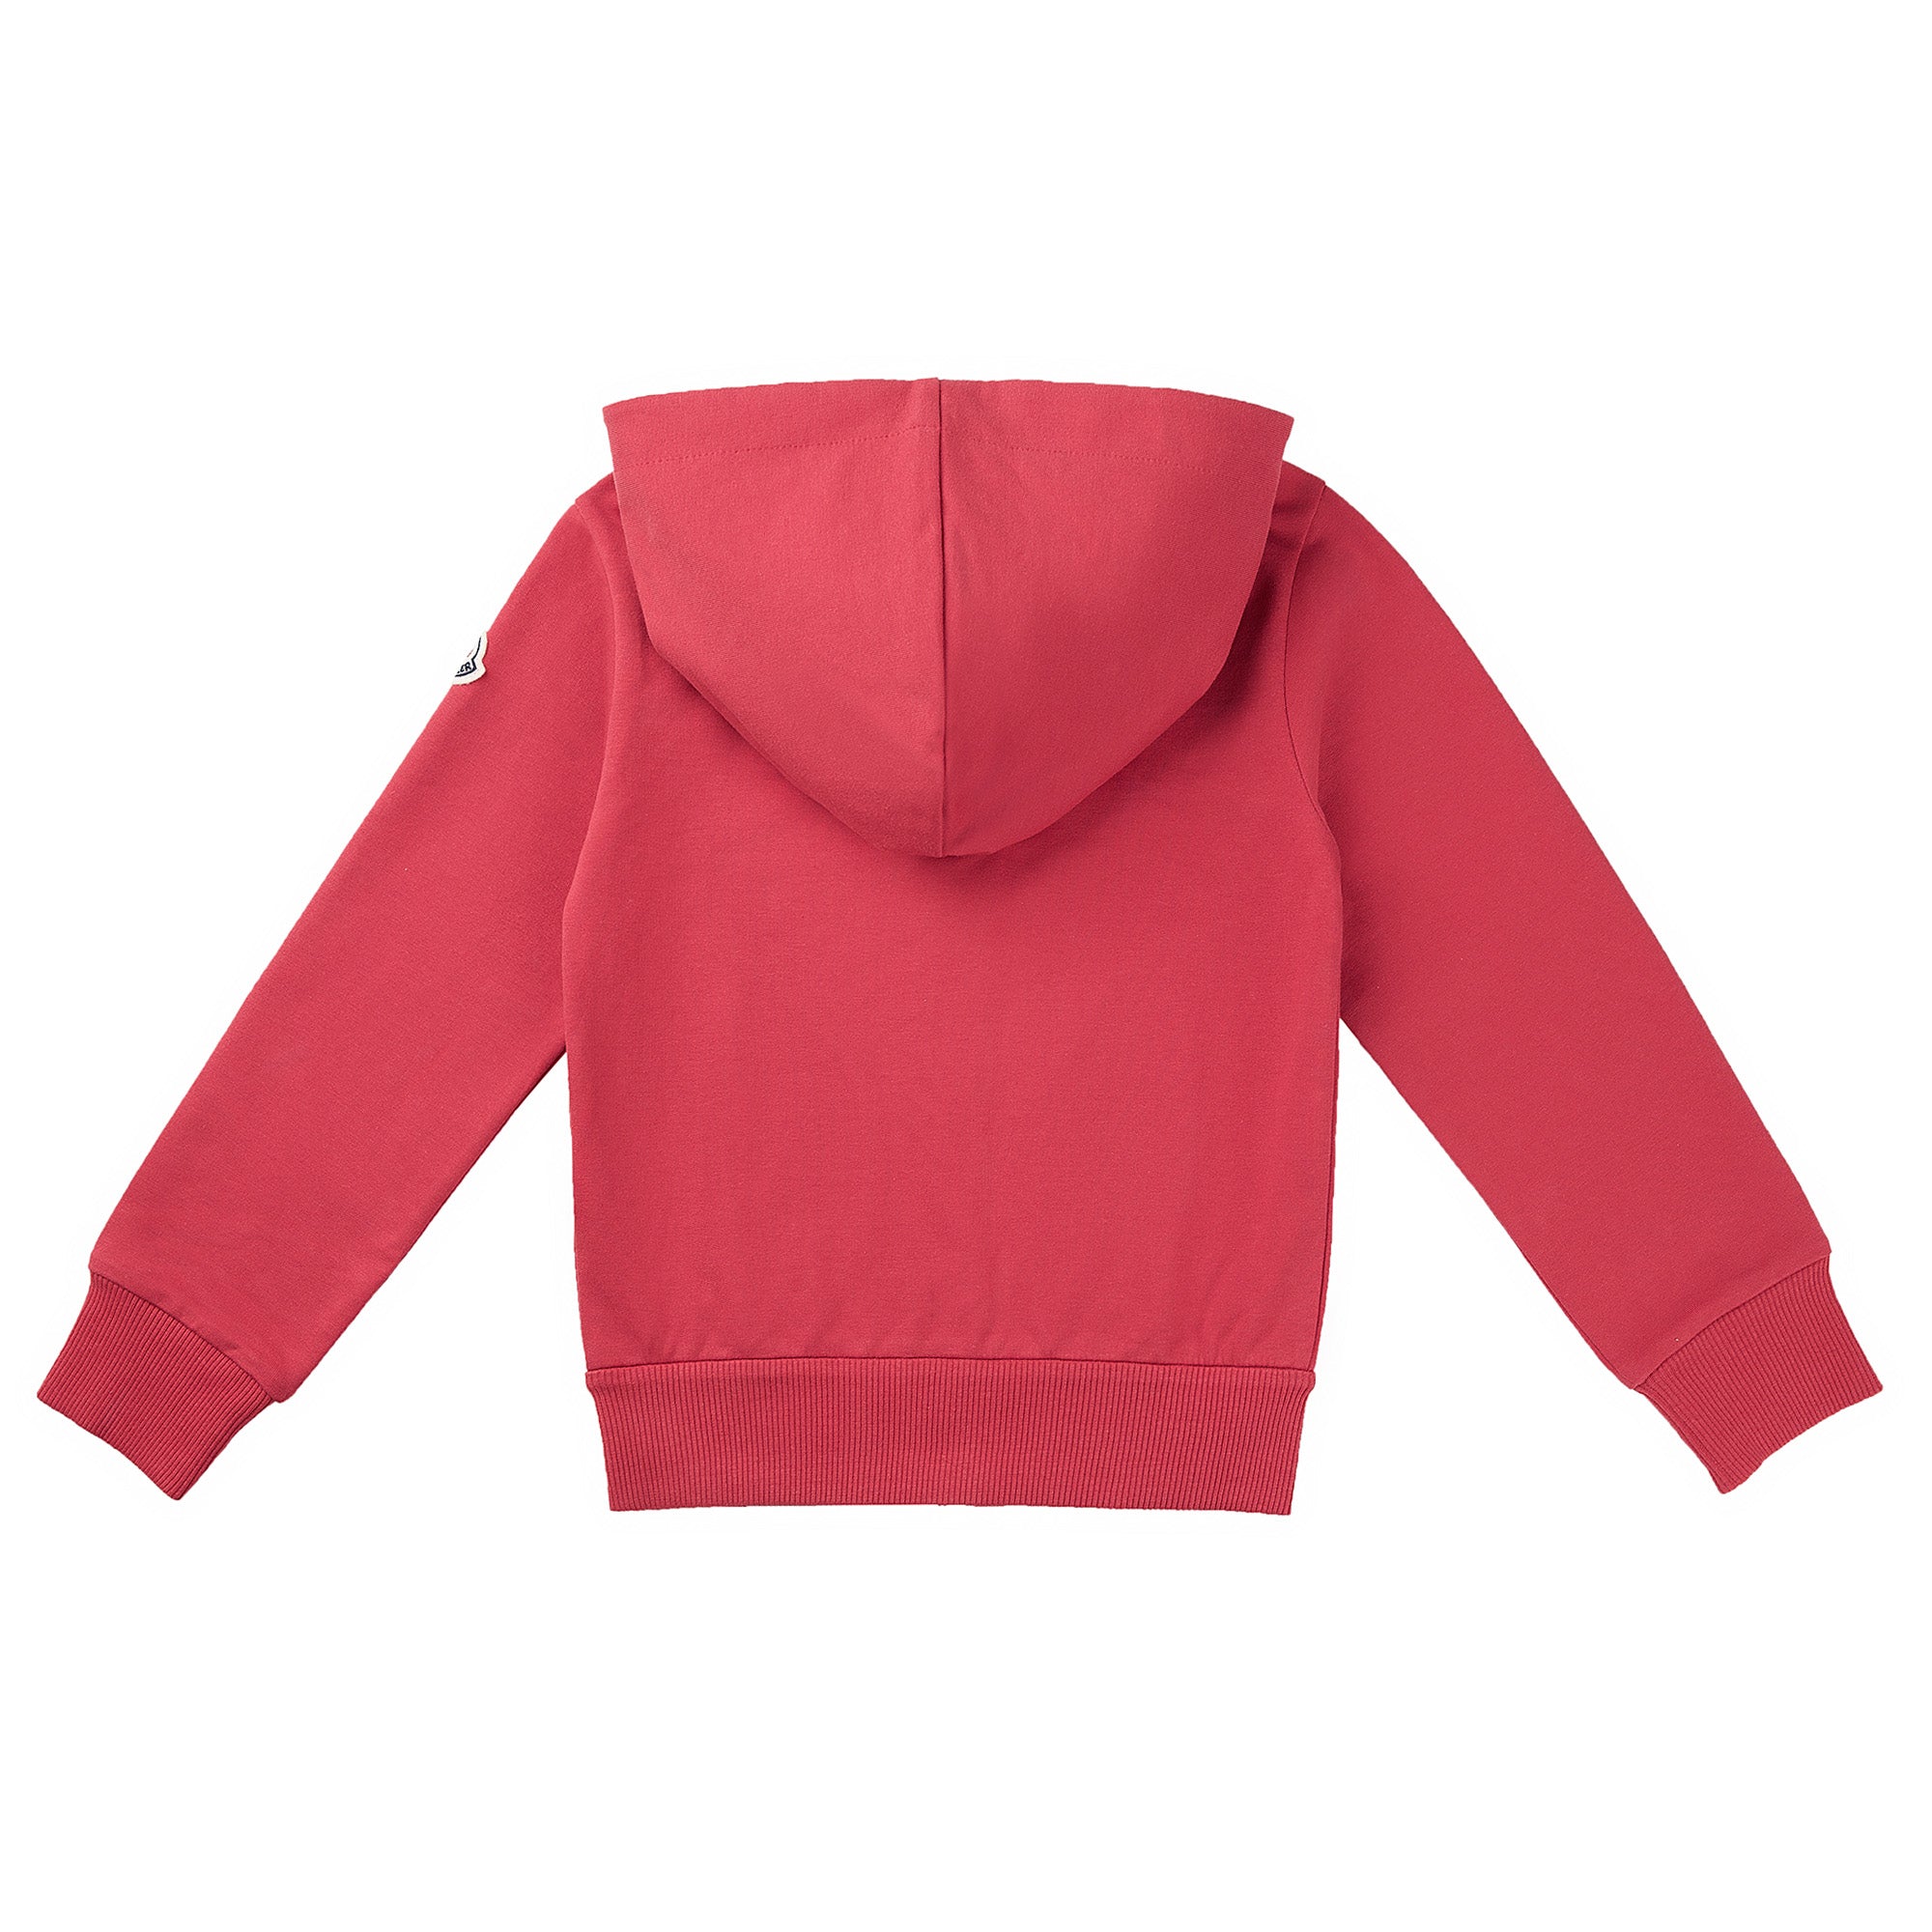 Girls Red Cotton Tracksuit